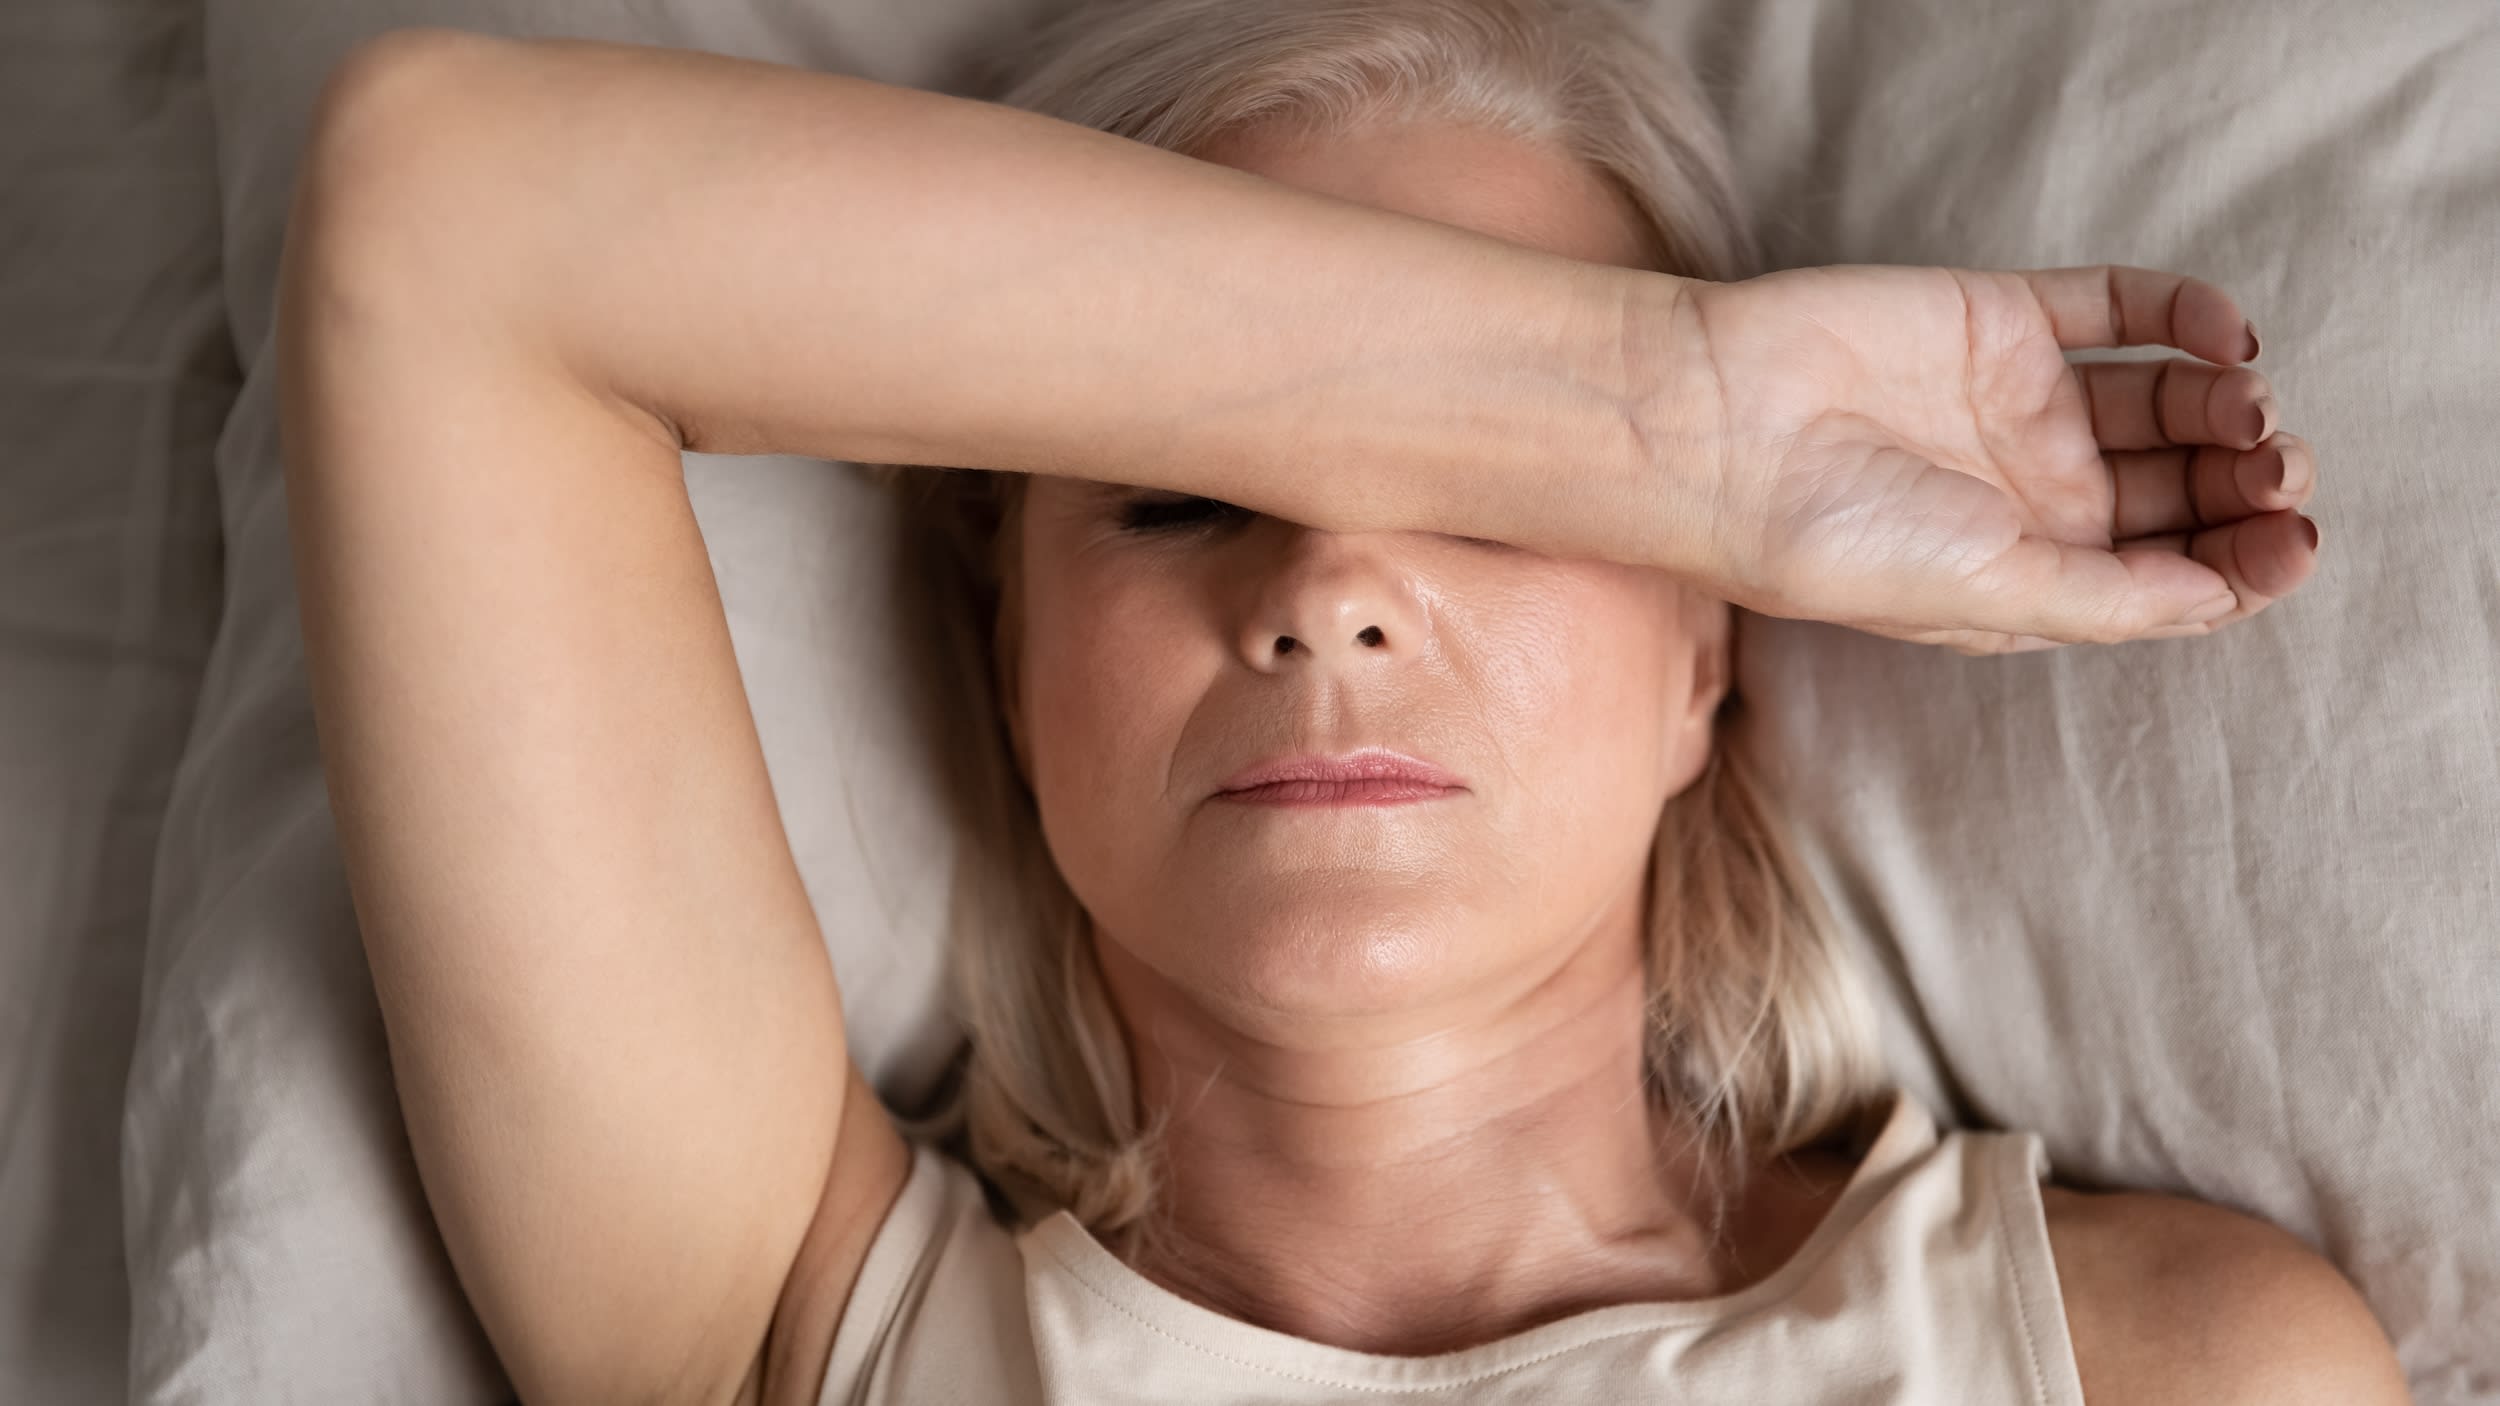 You don't have to suffer through menopause. Doctors discuss treatments